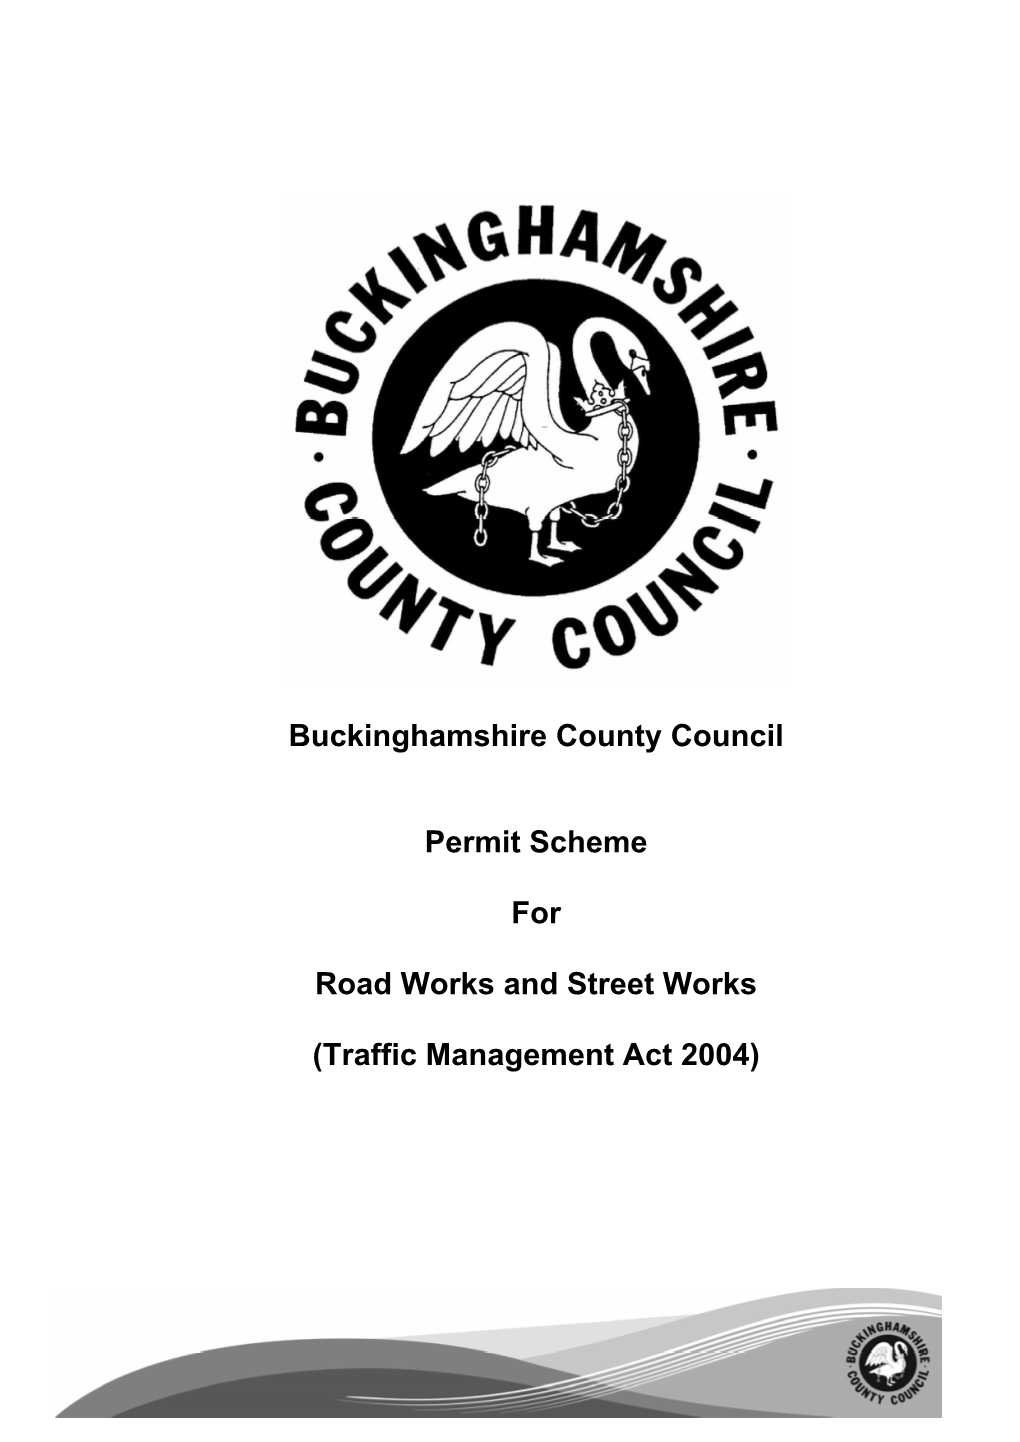 Buckinghamshire County Council Permit Scheme for Road Works and Street Works (Traffic Management Act 2004)